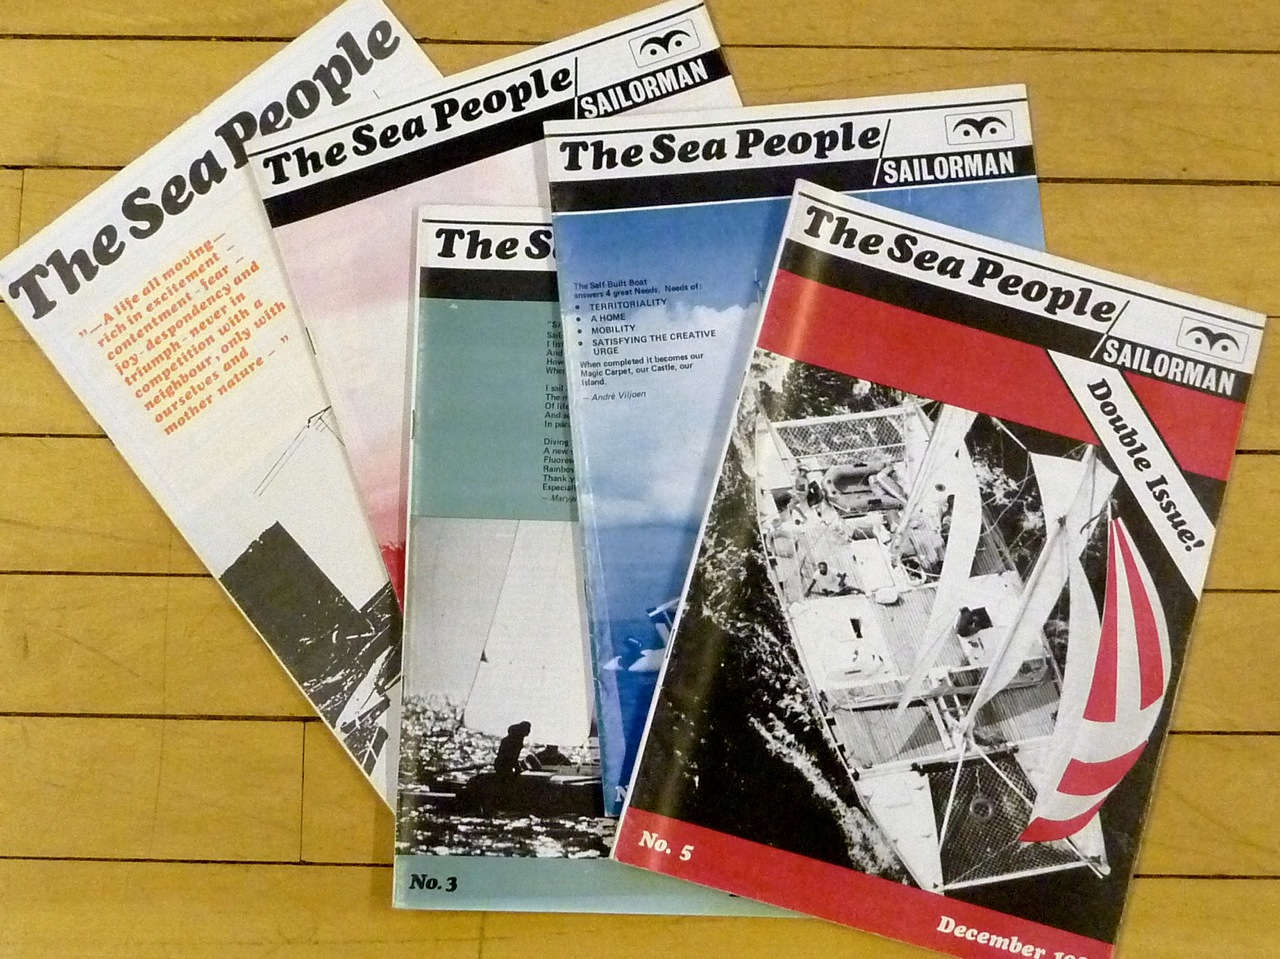 Five magazines spread out on a wooden surface, titled 'The Sea People'